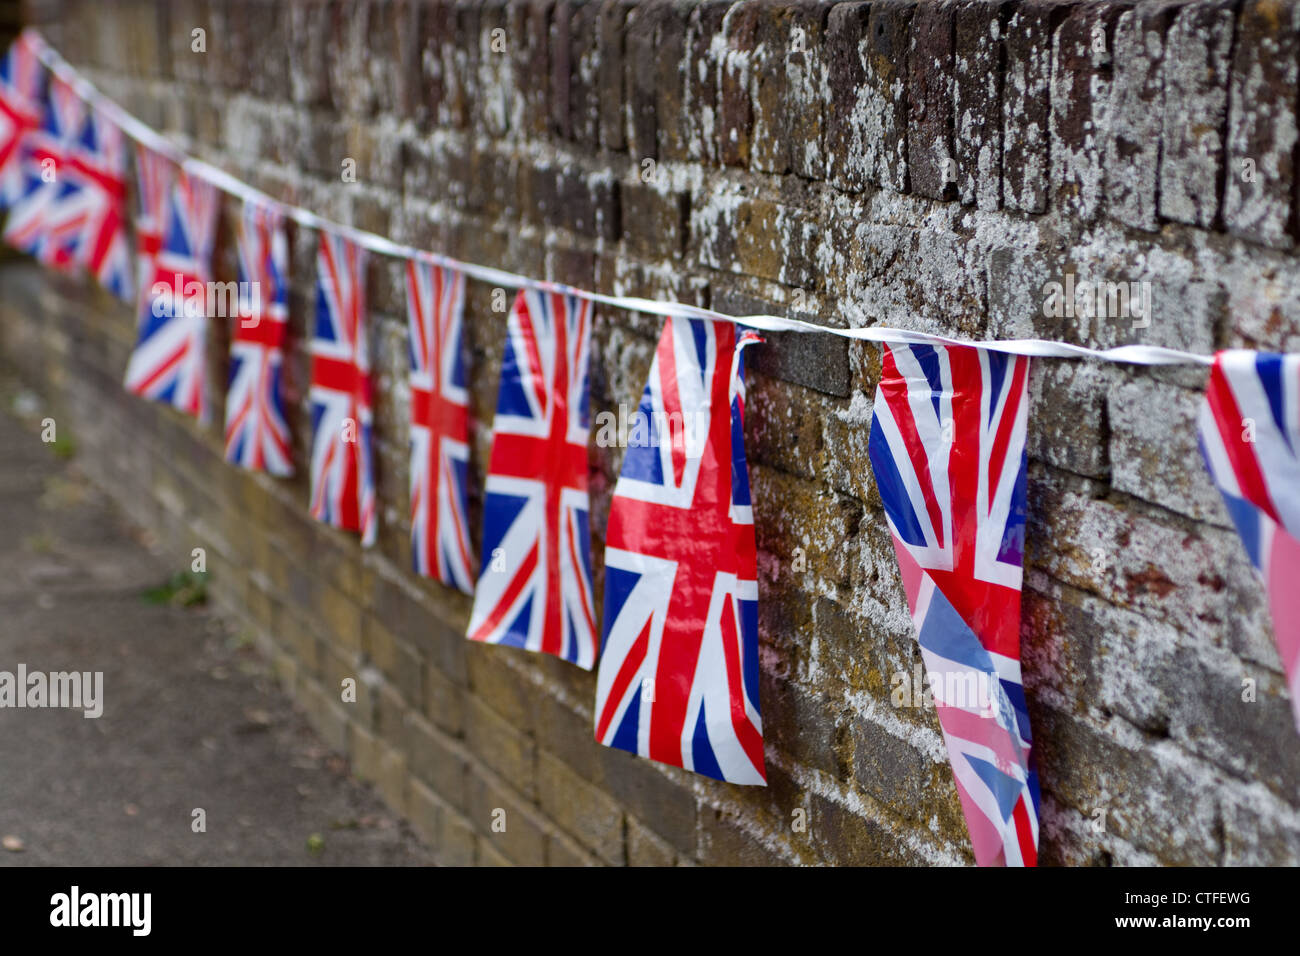 Sussex British County 3 metre long 10 flag bunting 